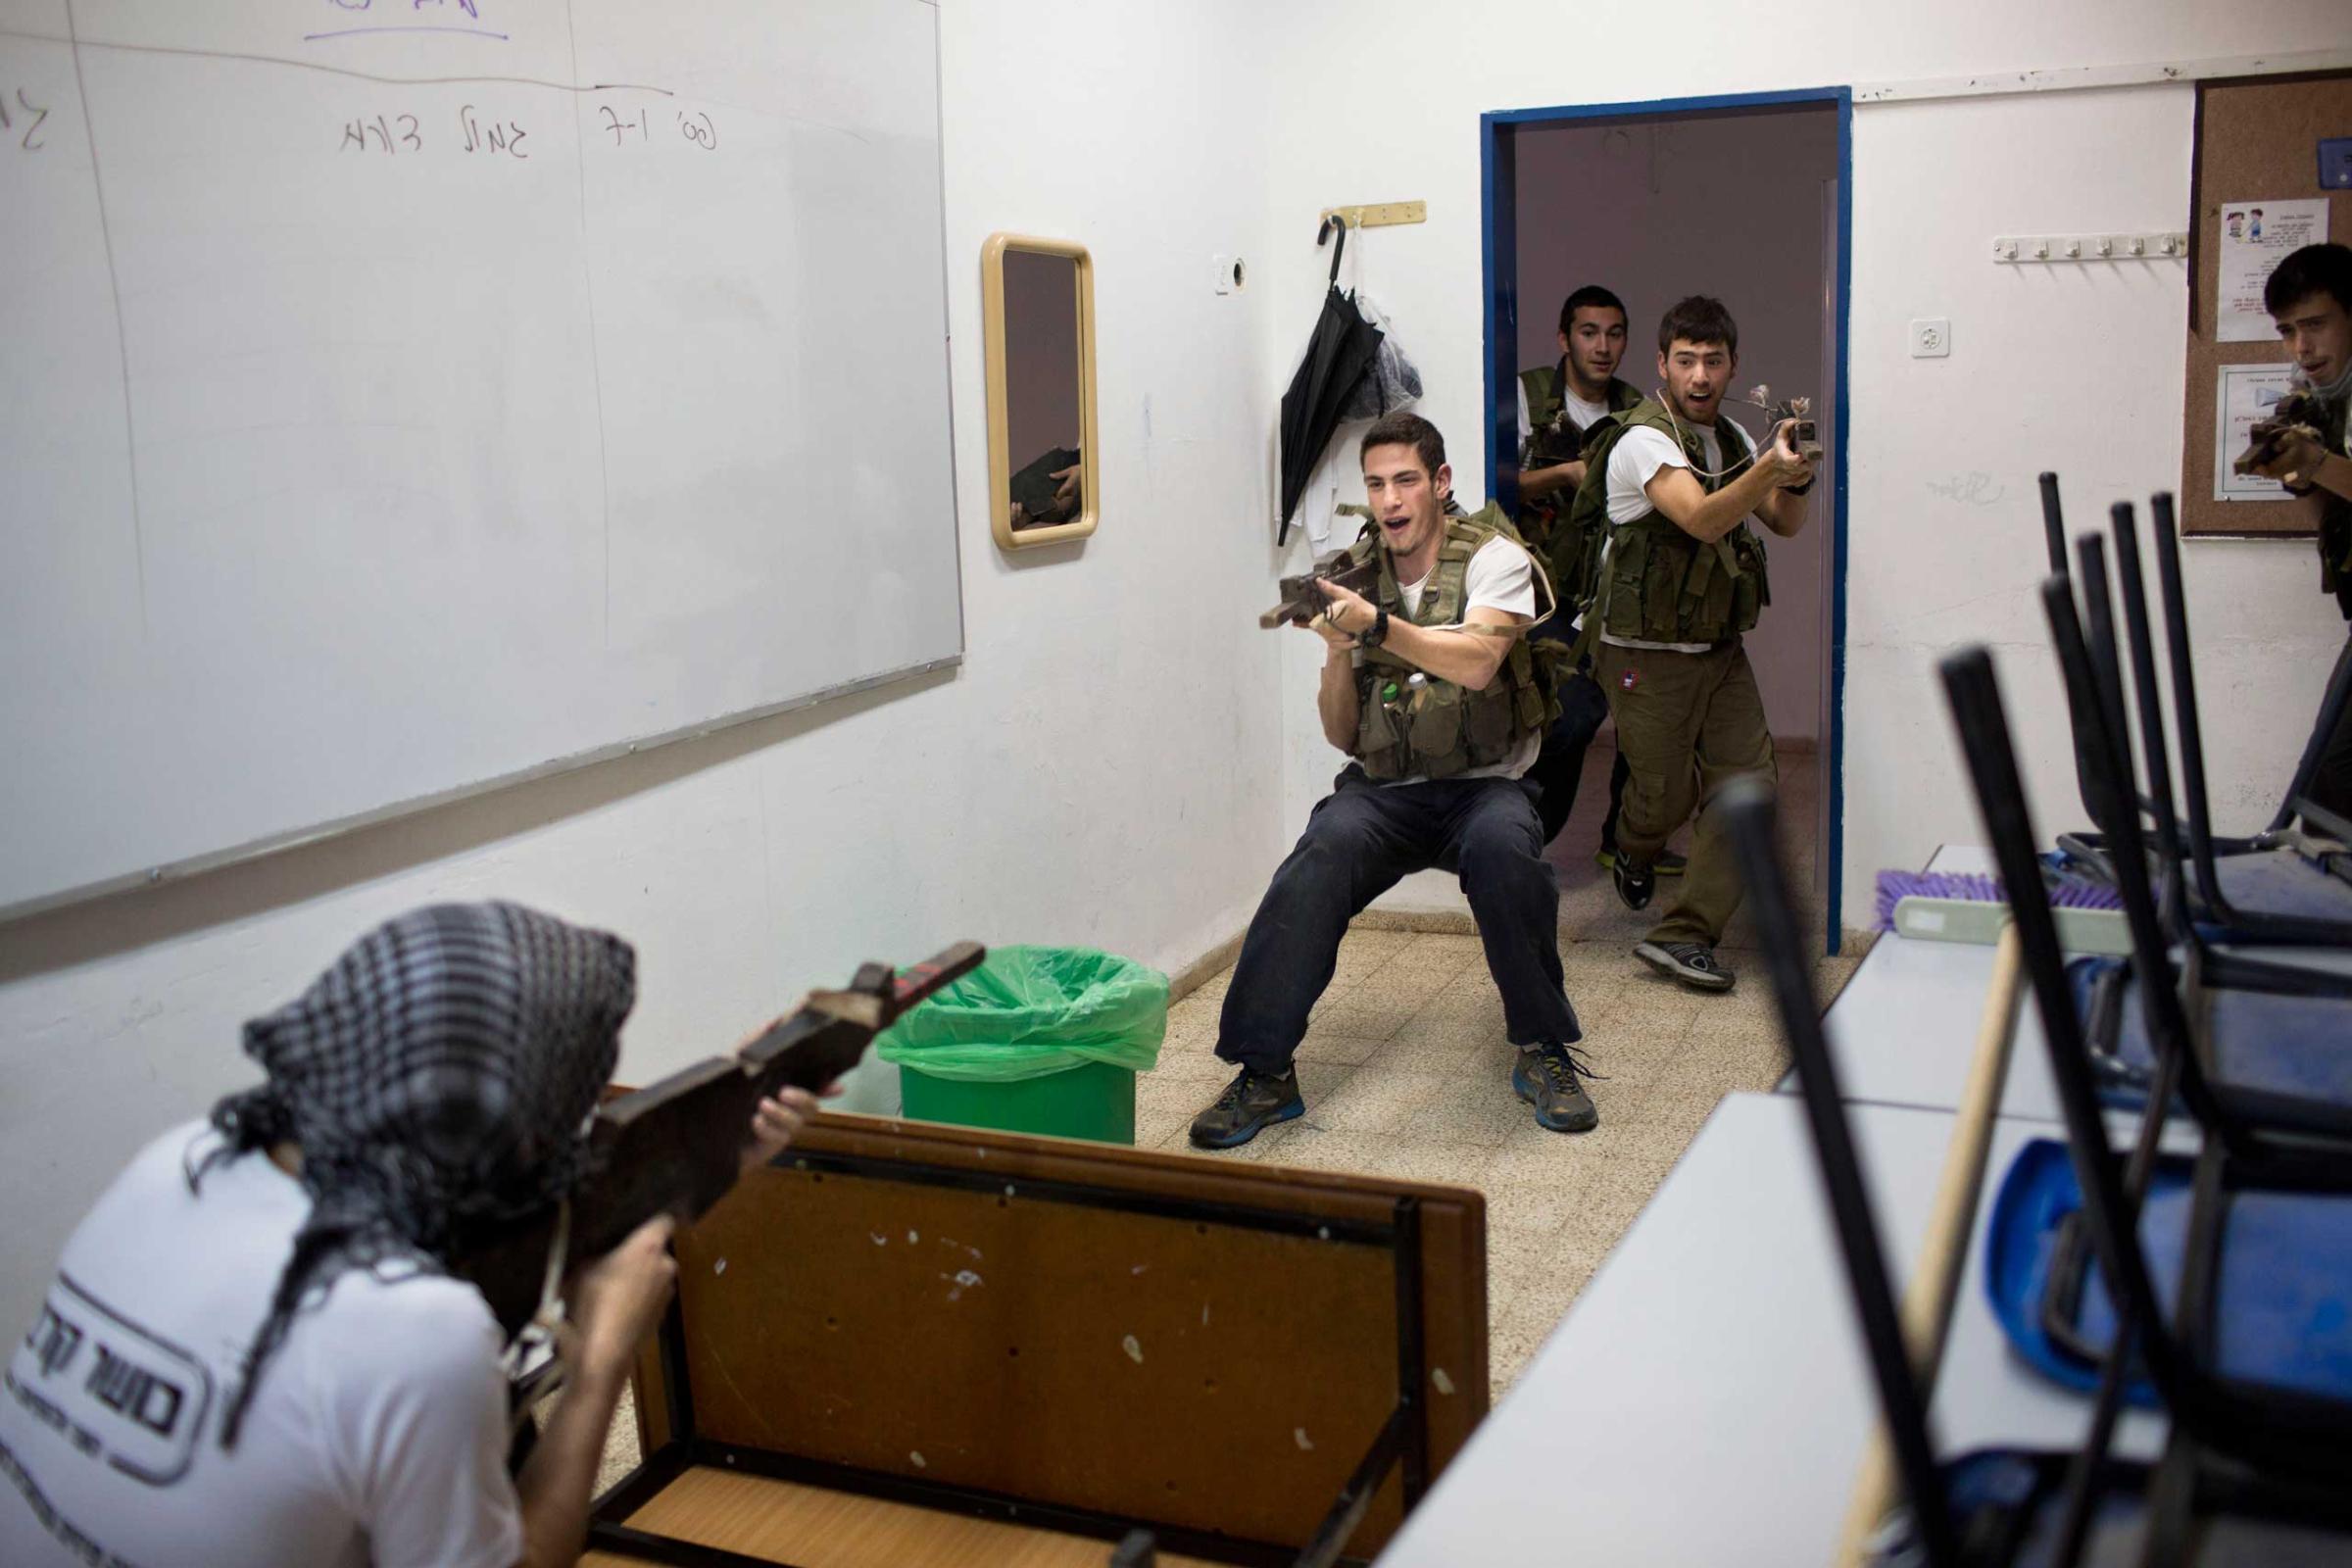 Israeli high-school seniors preparing to join the Israeli military participate in an urban fighting drill as part of privately run military combat fitness training, in Kibbutz Mizra, northern Israel, March 24, 2015.